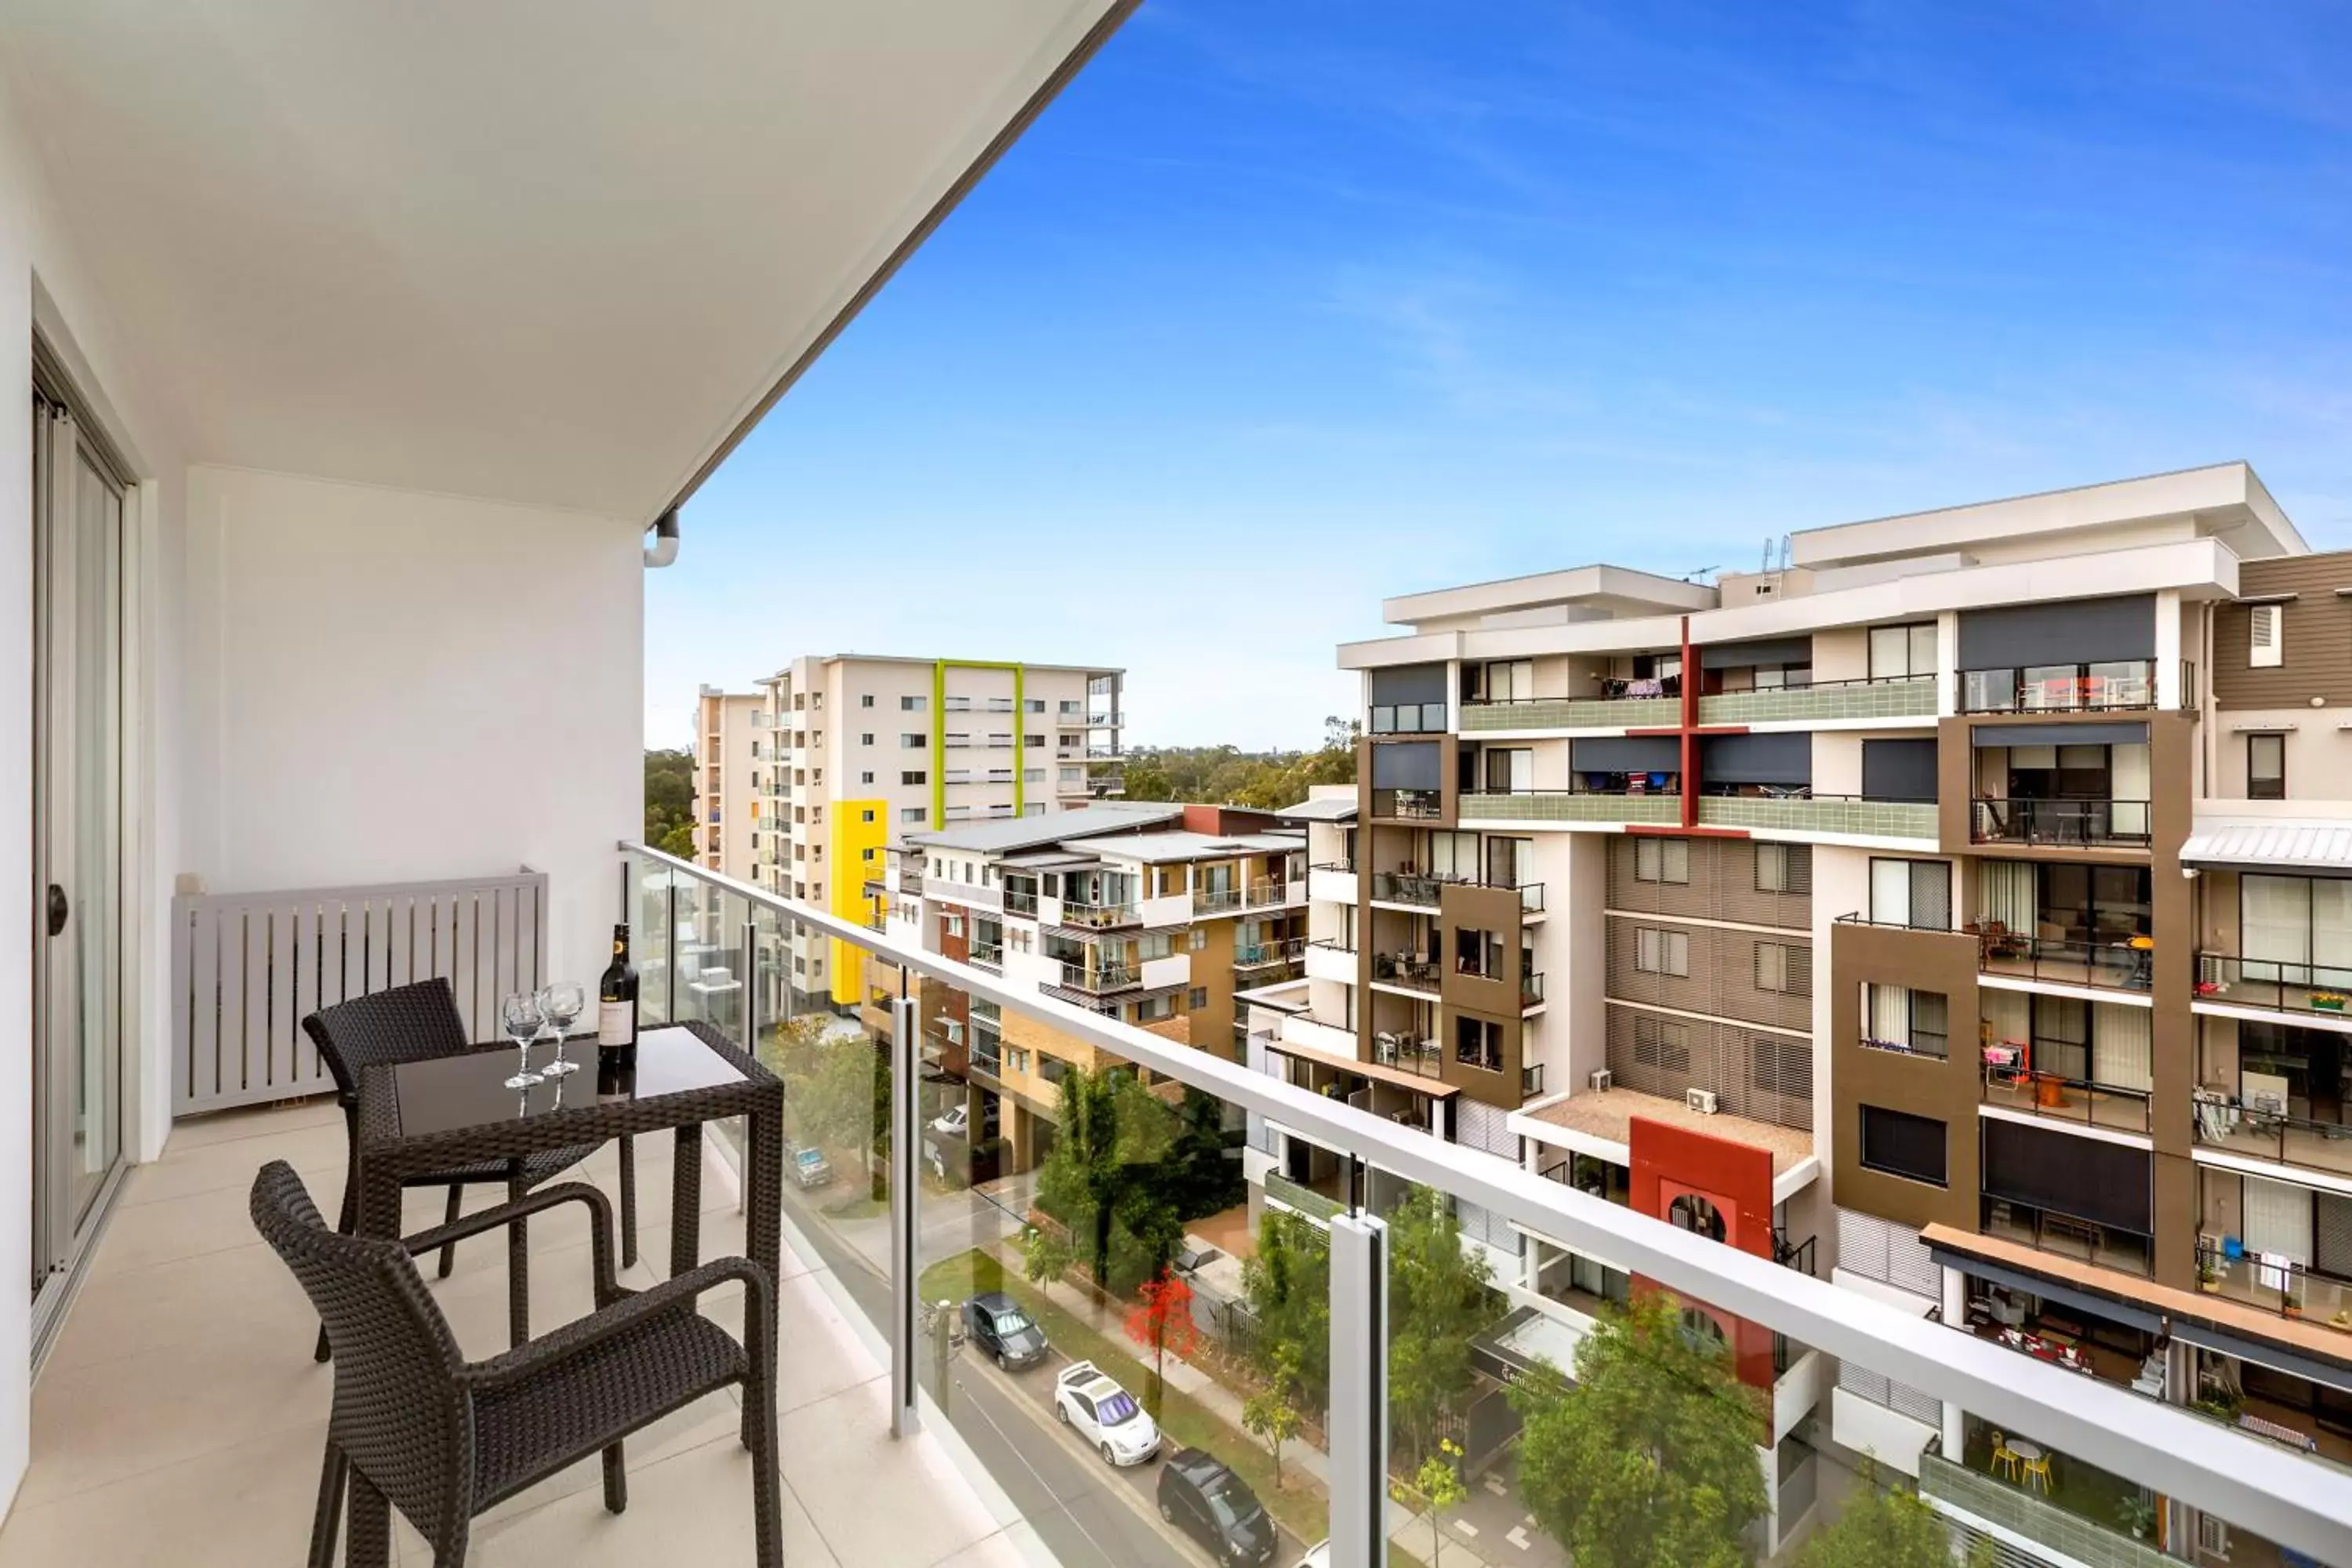 Balcony/Terrace in Quest Chermside on Playfield